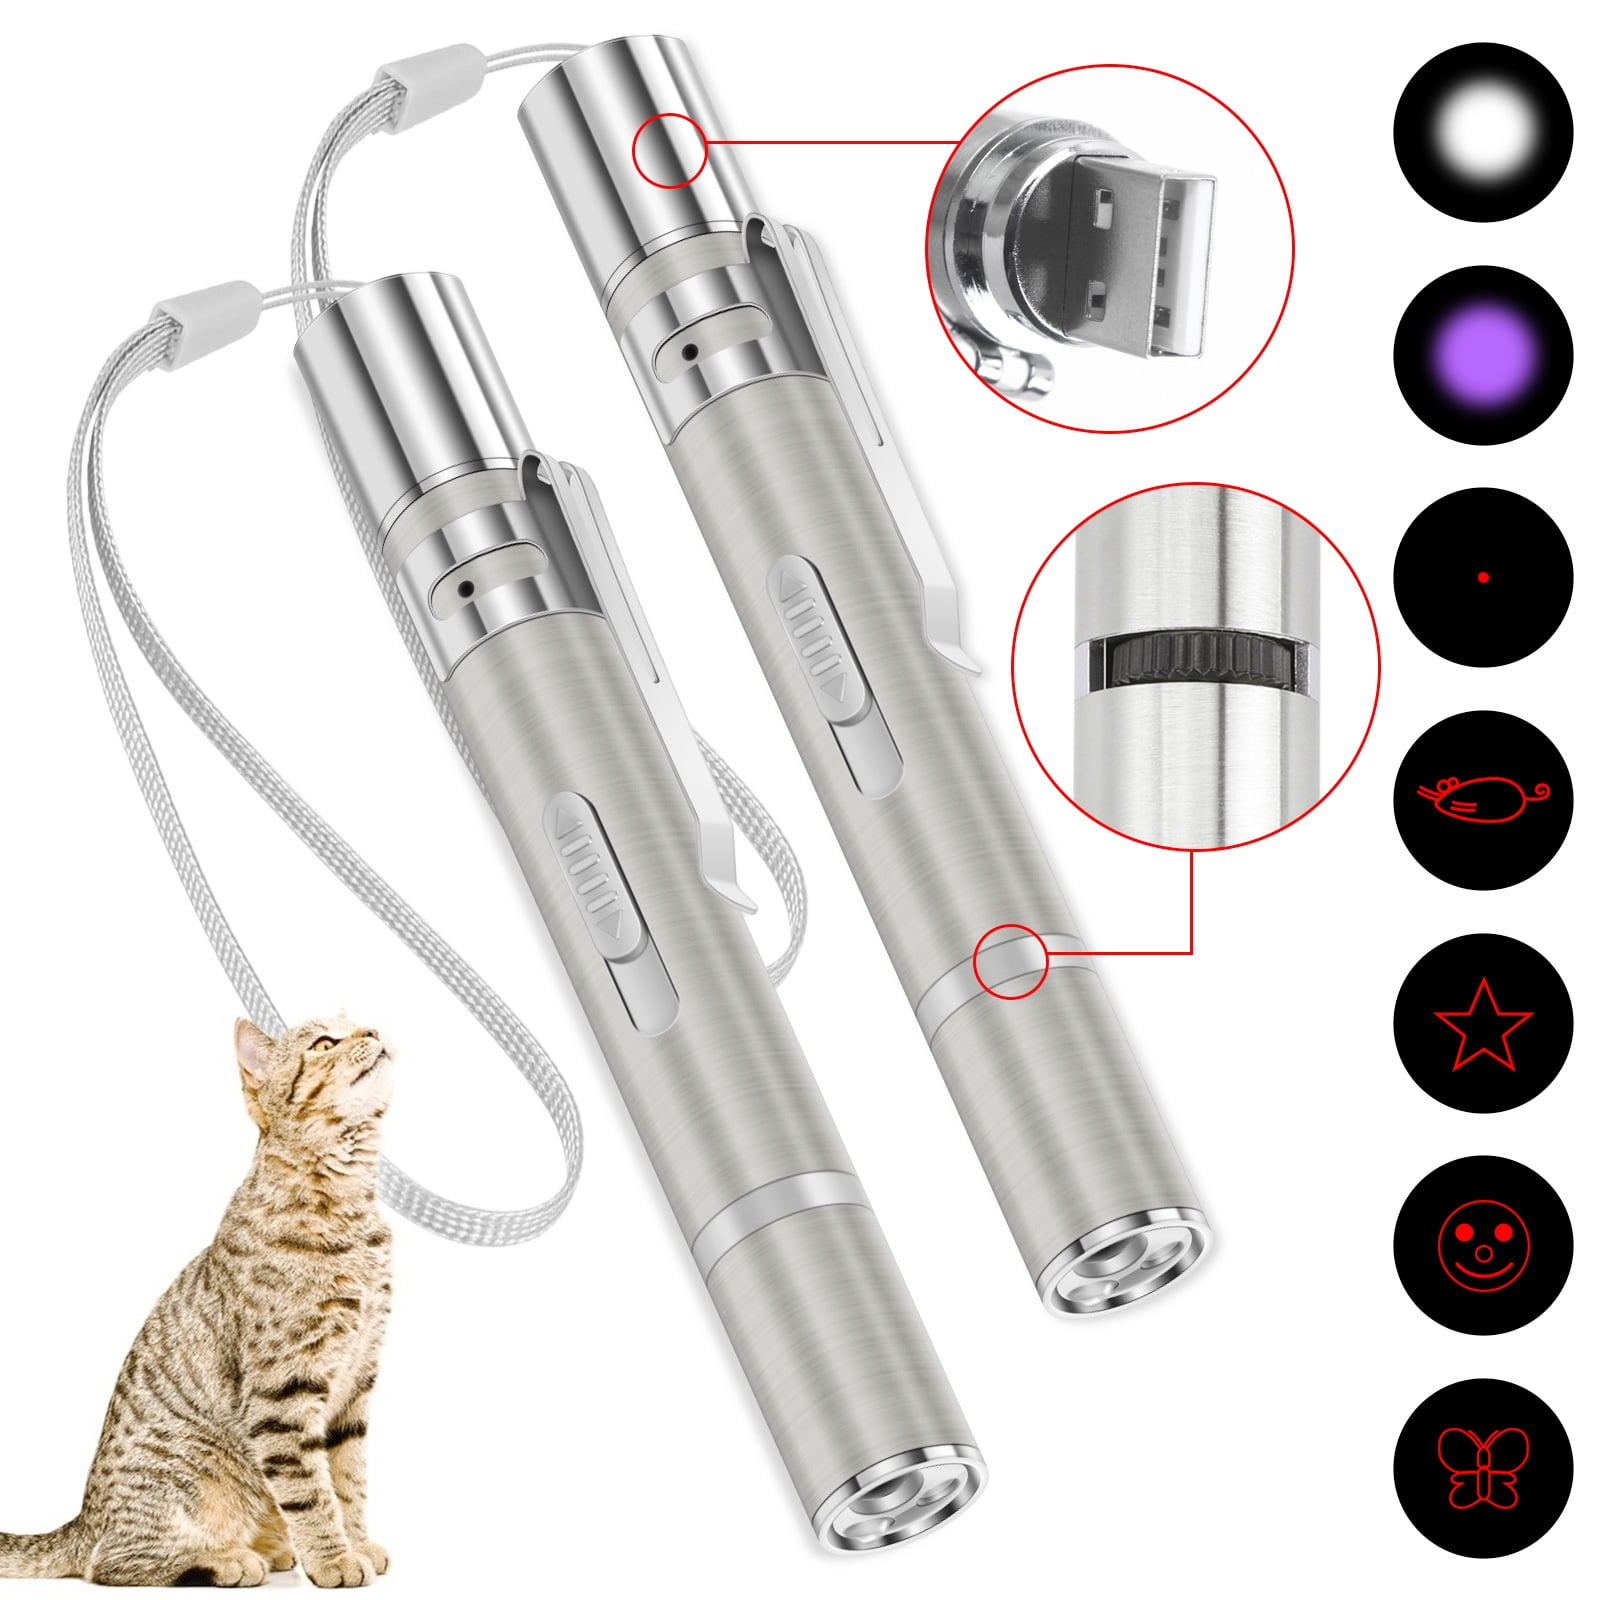 USB LASER POINTER RECHARGEABLE PEN 7 in 1 Cat Pet Training Toy Red UV Flashlight 